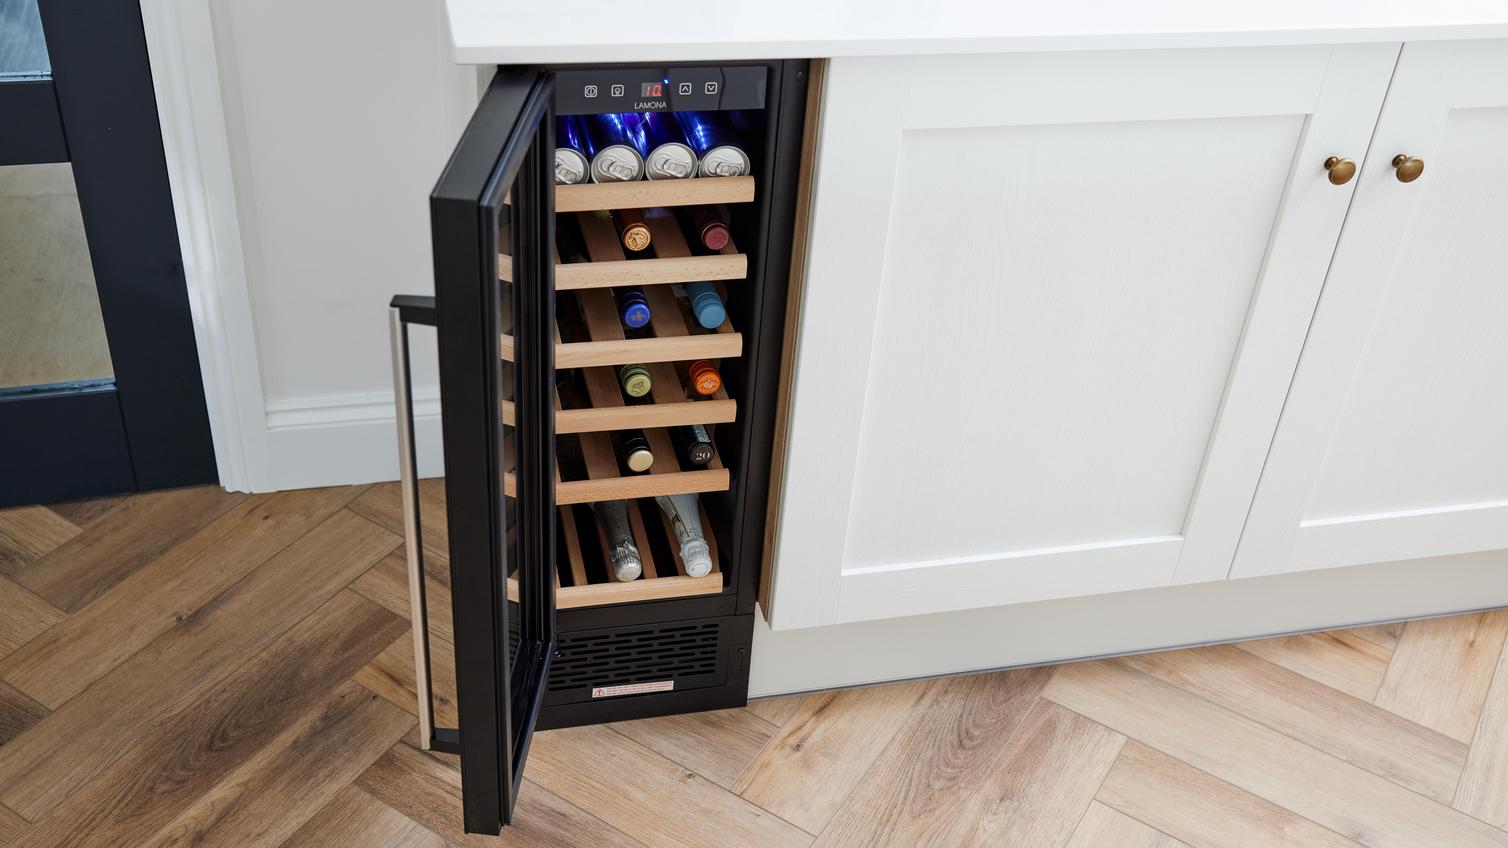 A wine cooler built into a Howdens kitchen